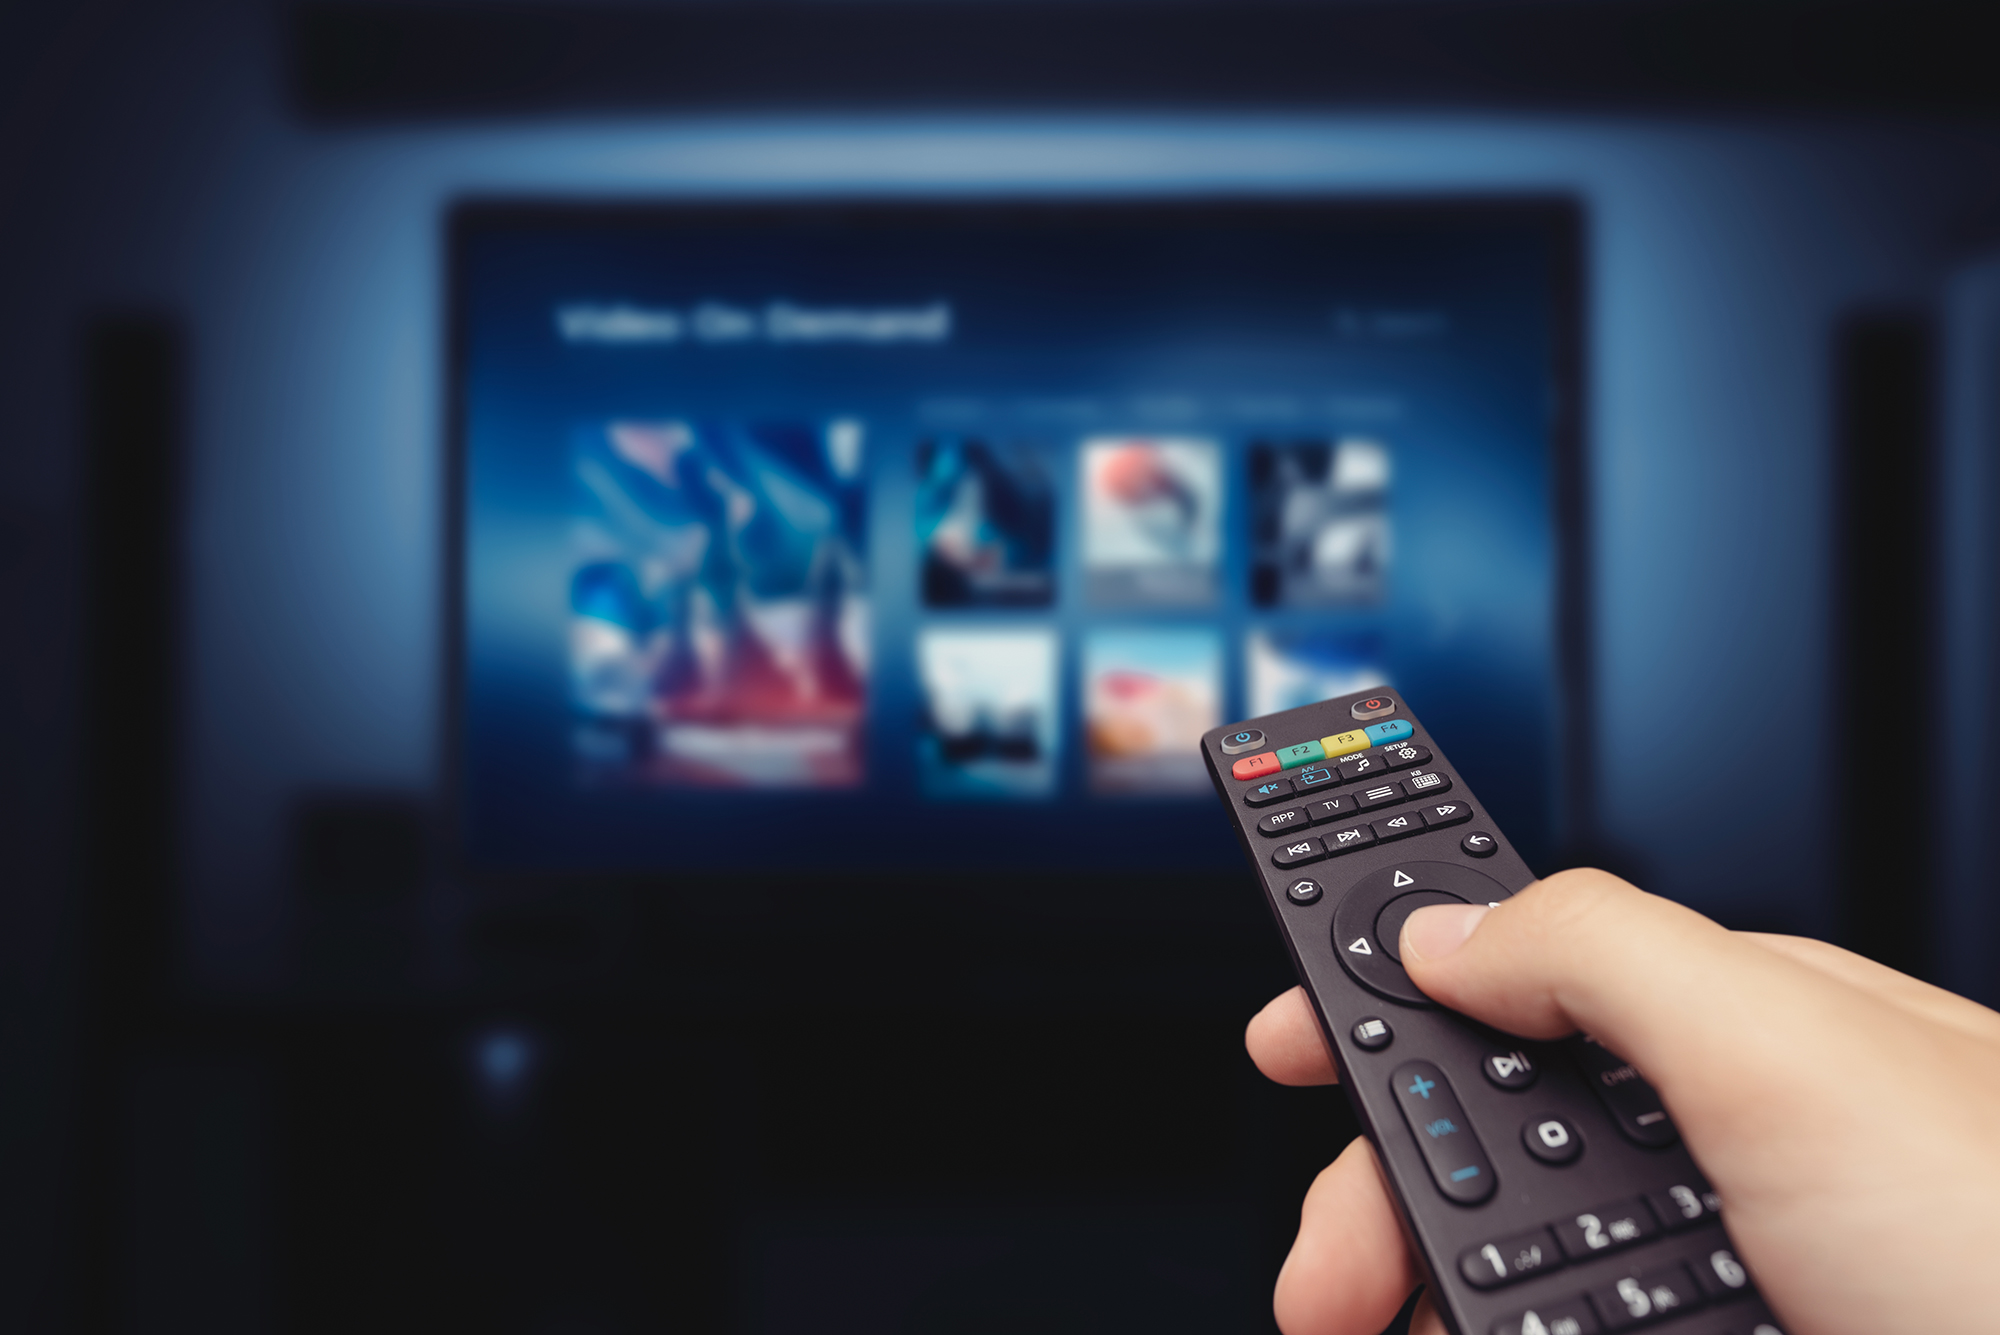 VideoAmp brings together unique data characteristics from Set-Top-Box (STB) data commingled with Automatic Content Recognition (ACR) data to create the largest and most robust linear television and OTT dataset powering the advanced television market today.